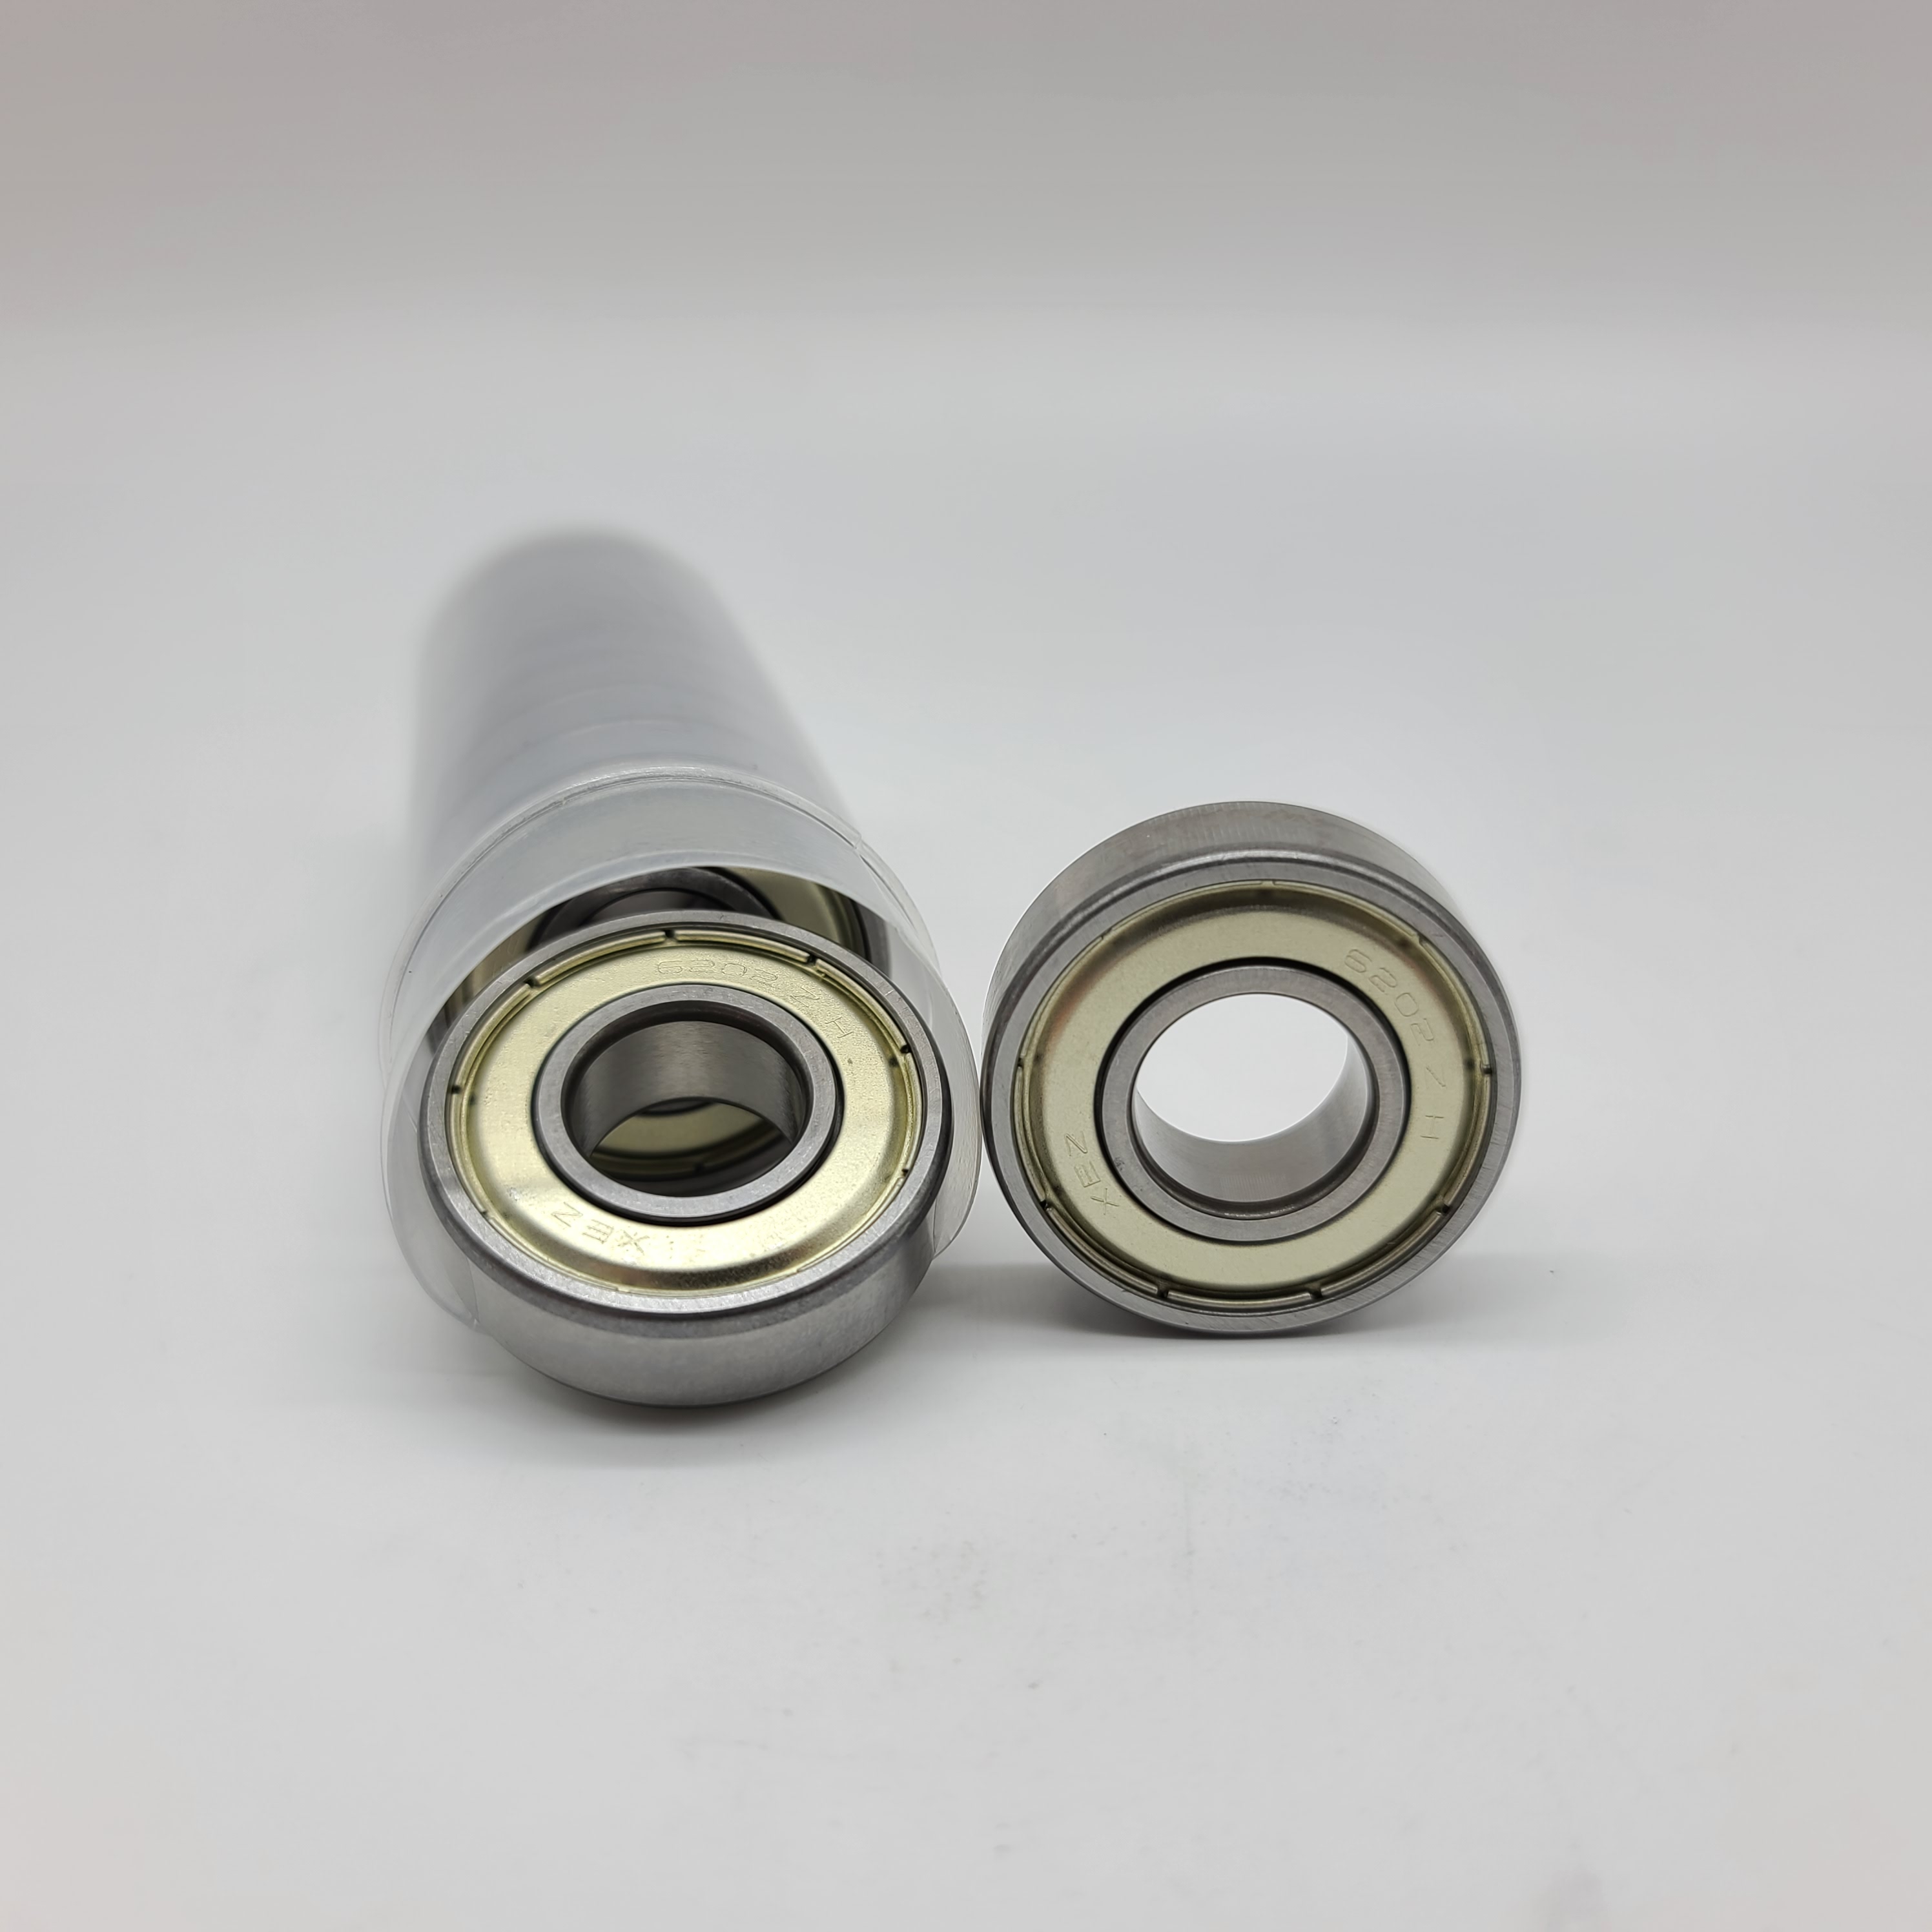 6202 zv2 zv3 for Luxury electric fan Deep groove ball bearing